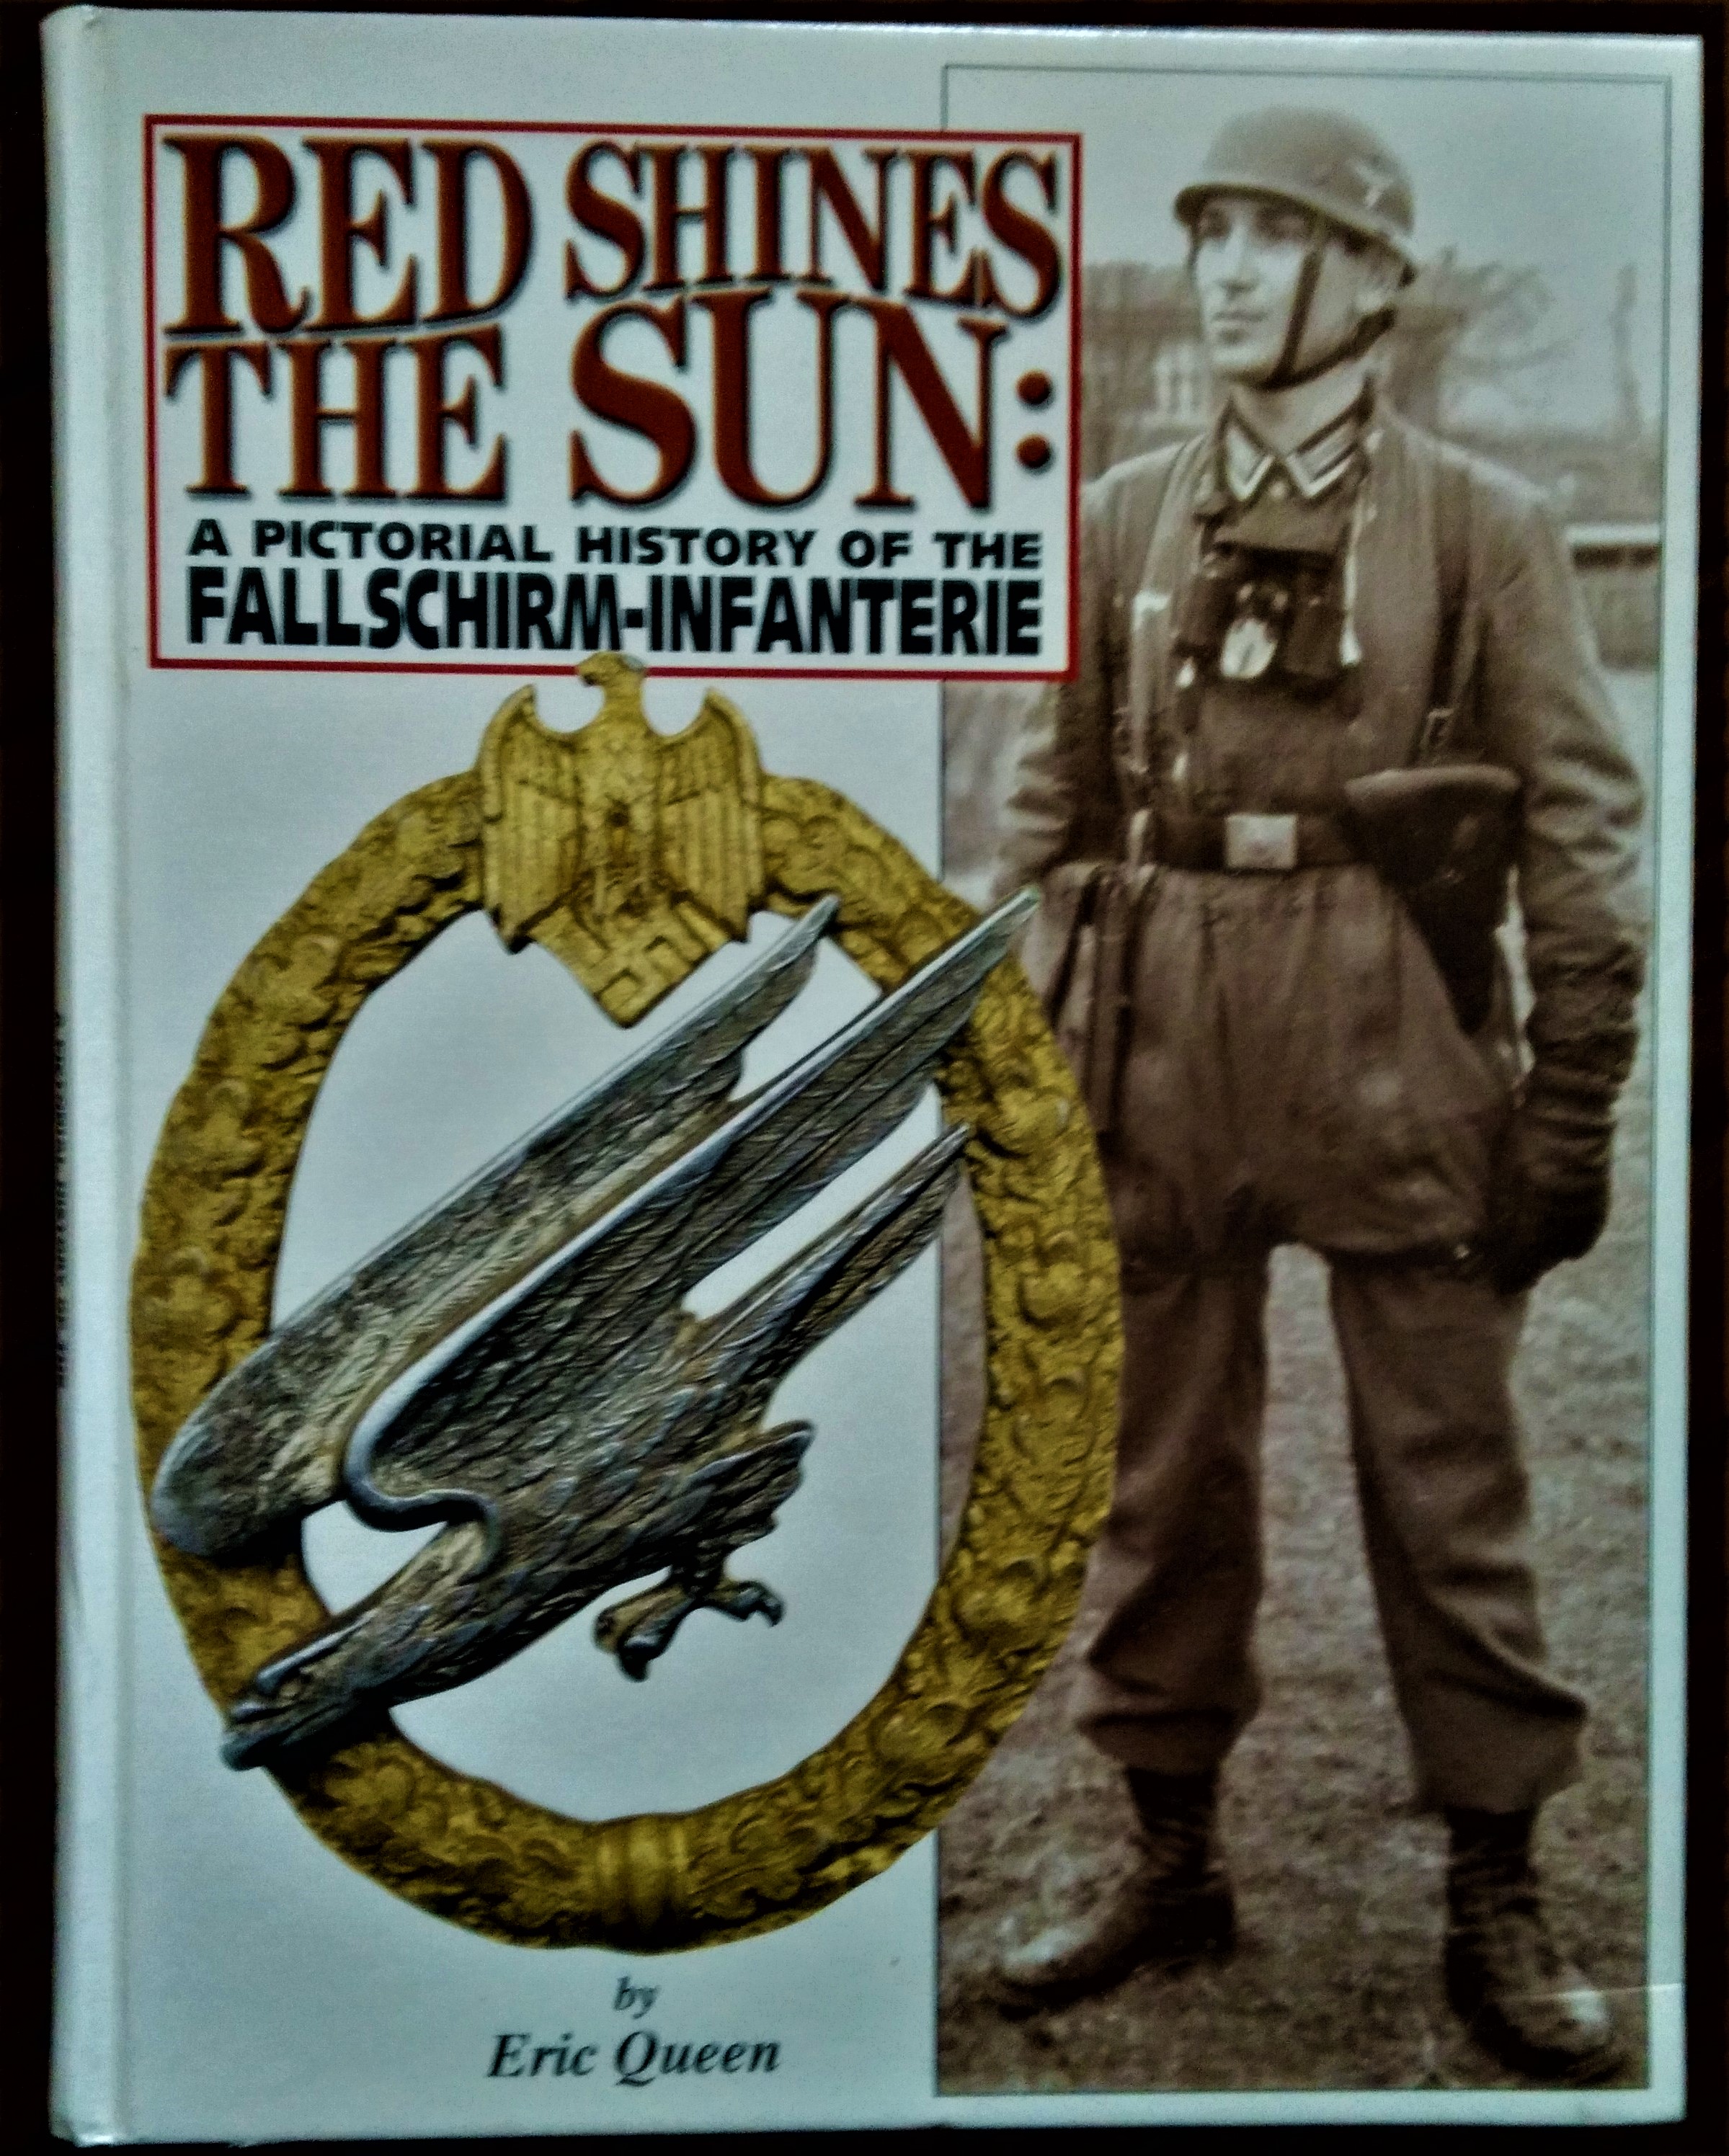 Red Shines The Sun: a pictorial hystory of the fallschirm-infanterie.